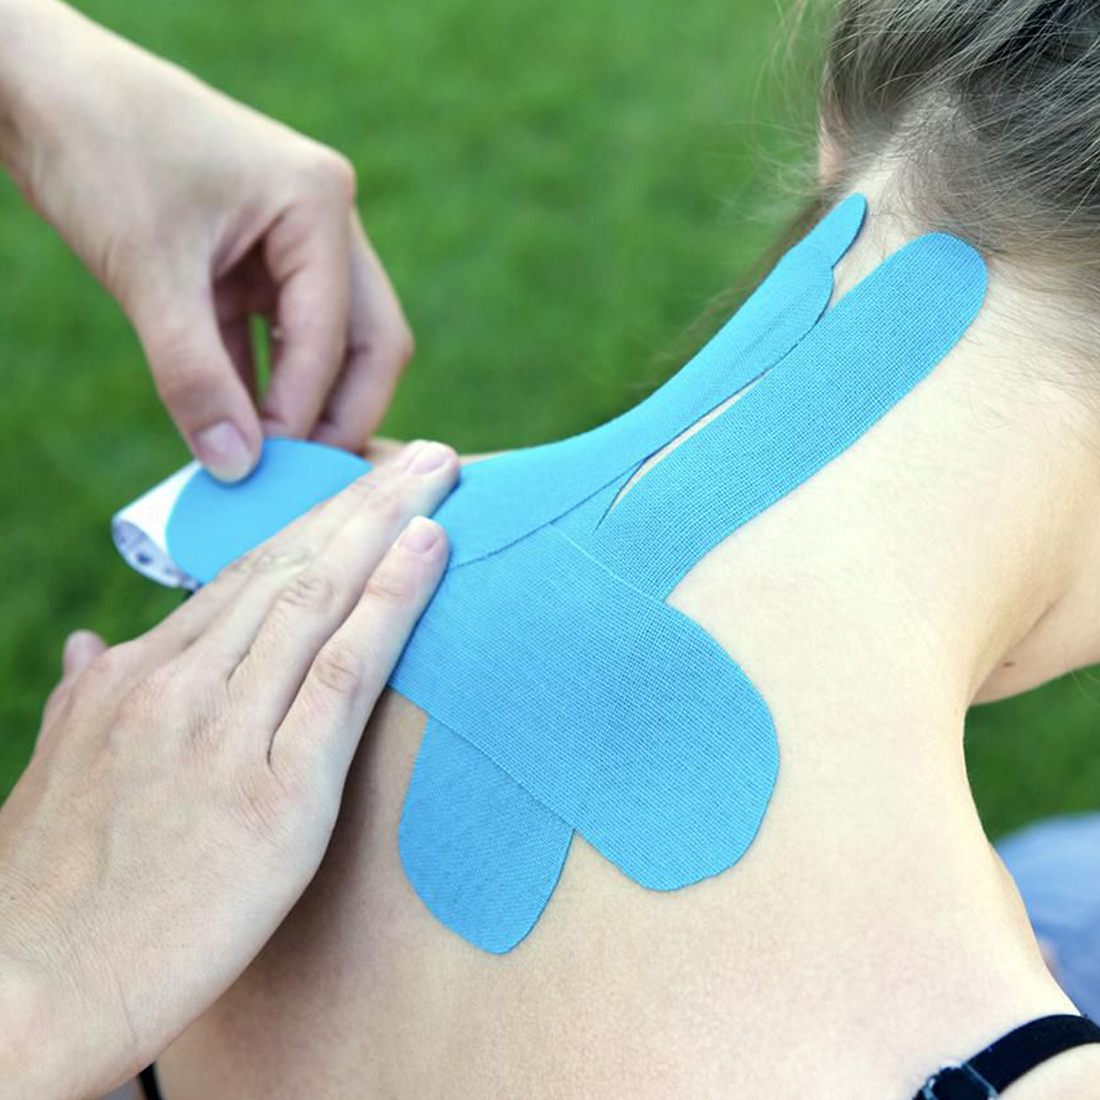 Why should you use kinesiology tape?